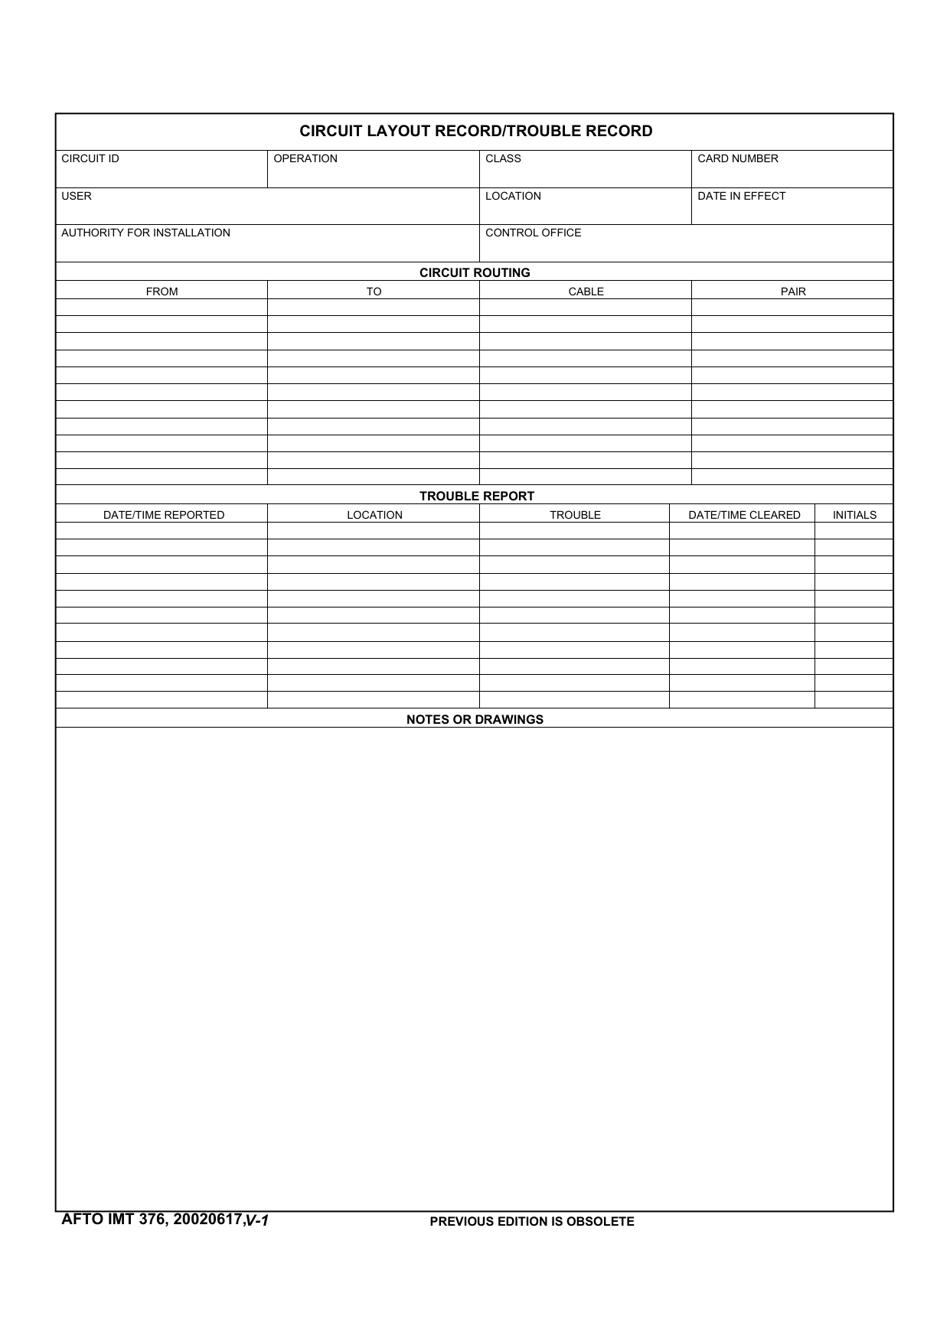 AFTO IMT Form 376 Circuit Layout Record / Trouble Record, Page 1